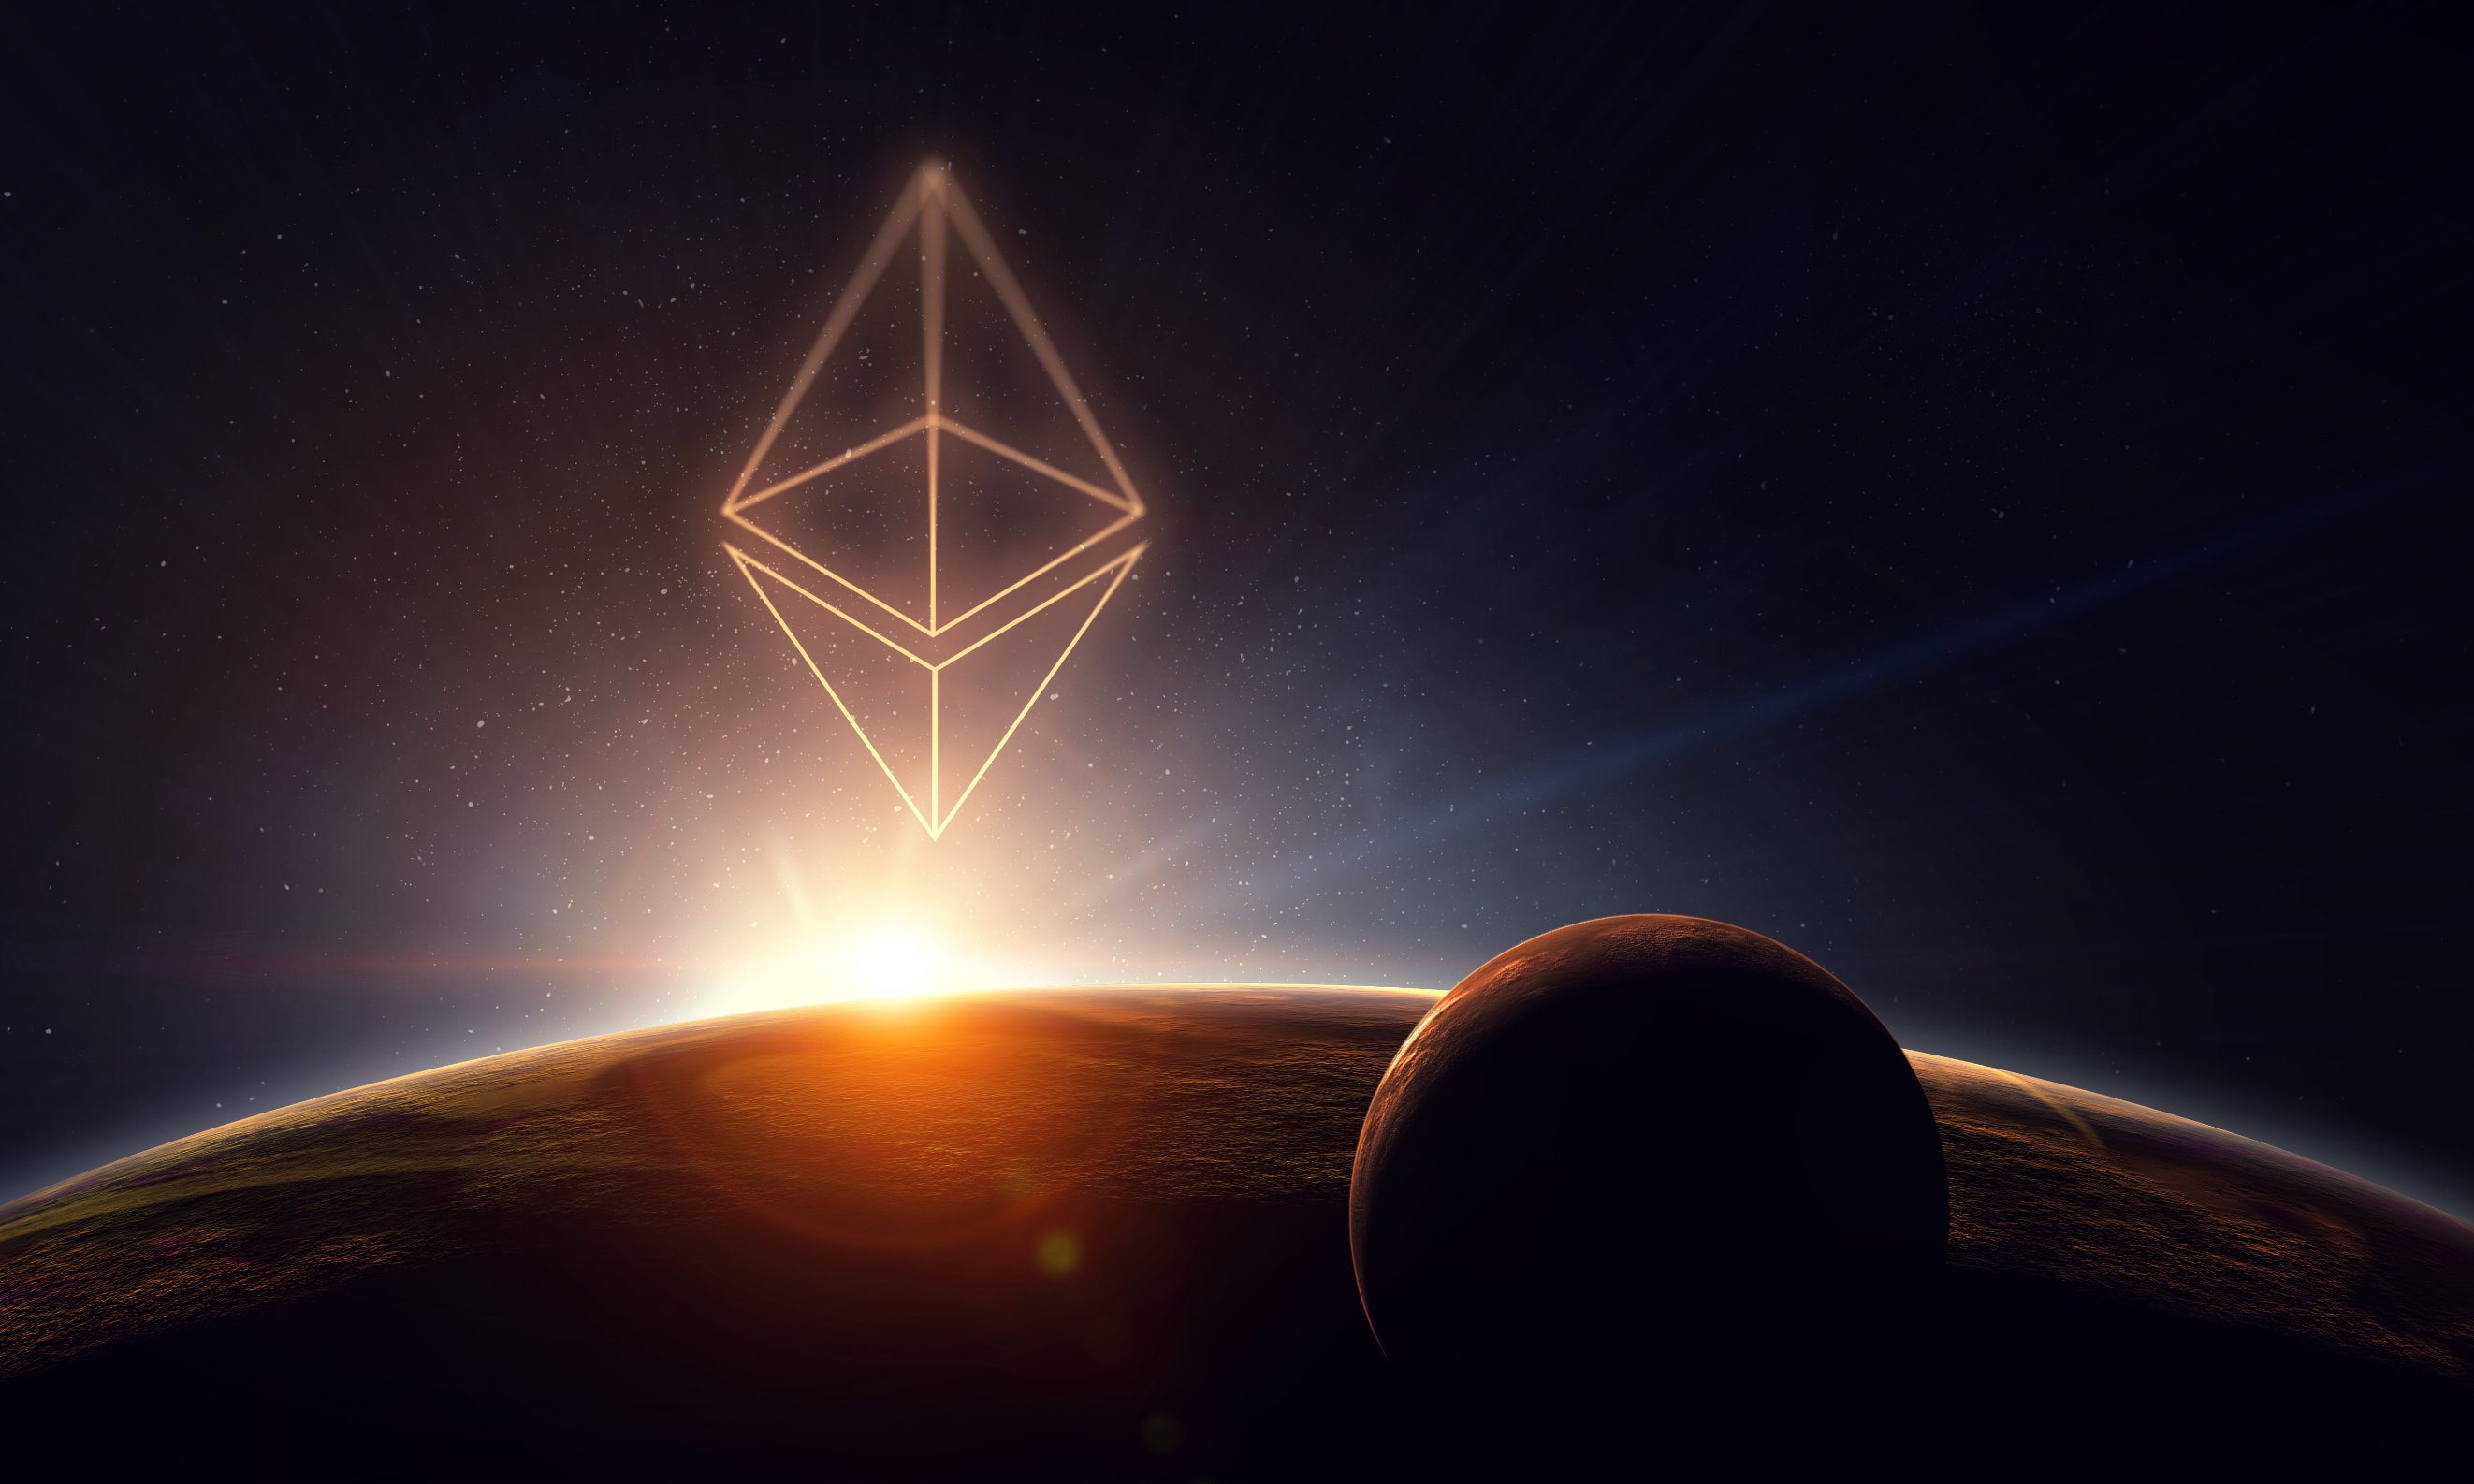  ethereum despite rally recent sell time firmly 